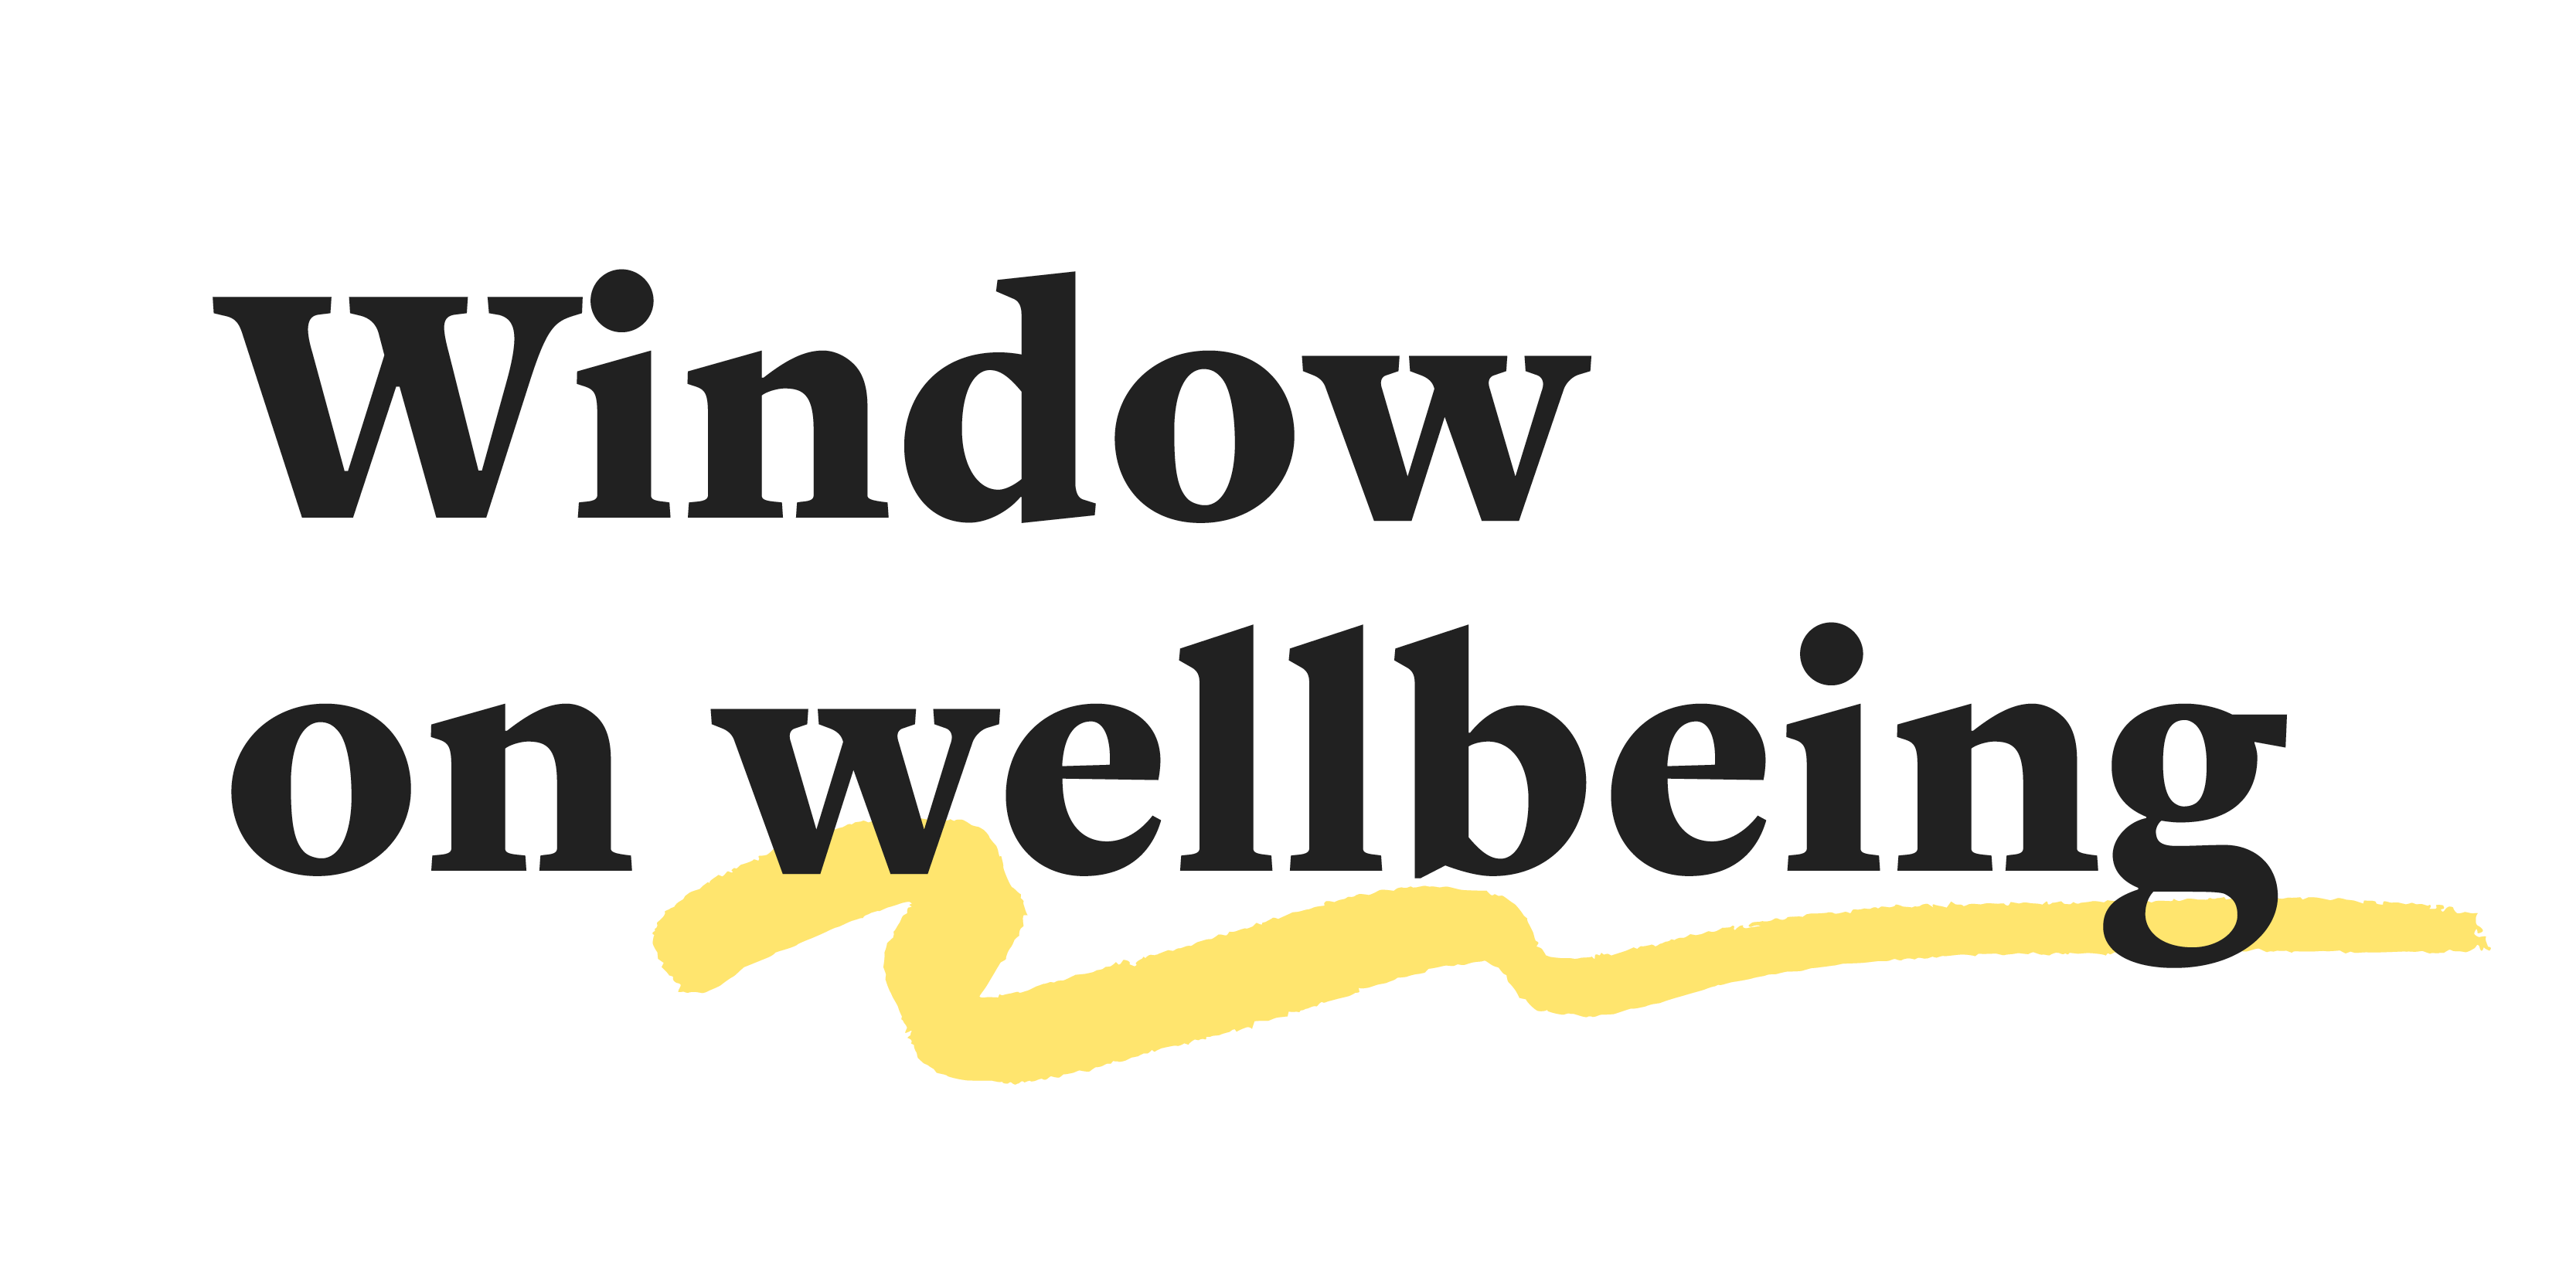 Window on wellbeing text